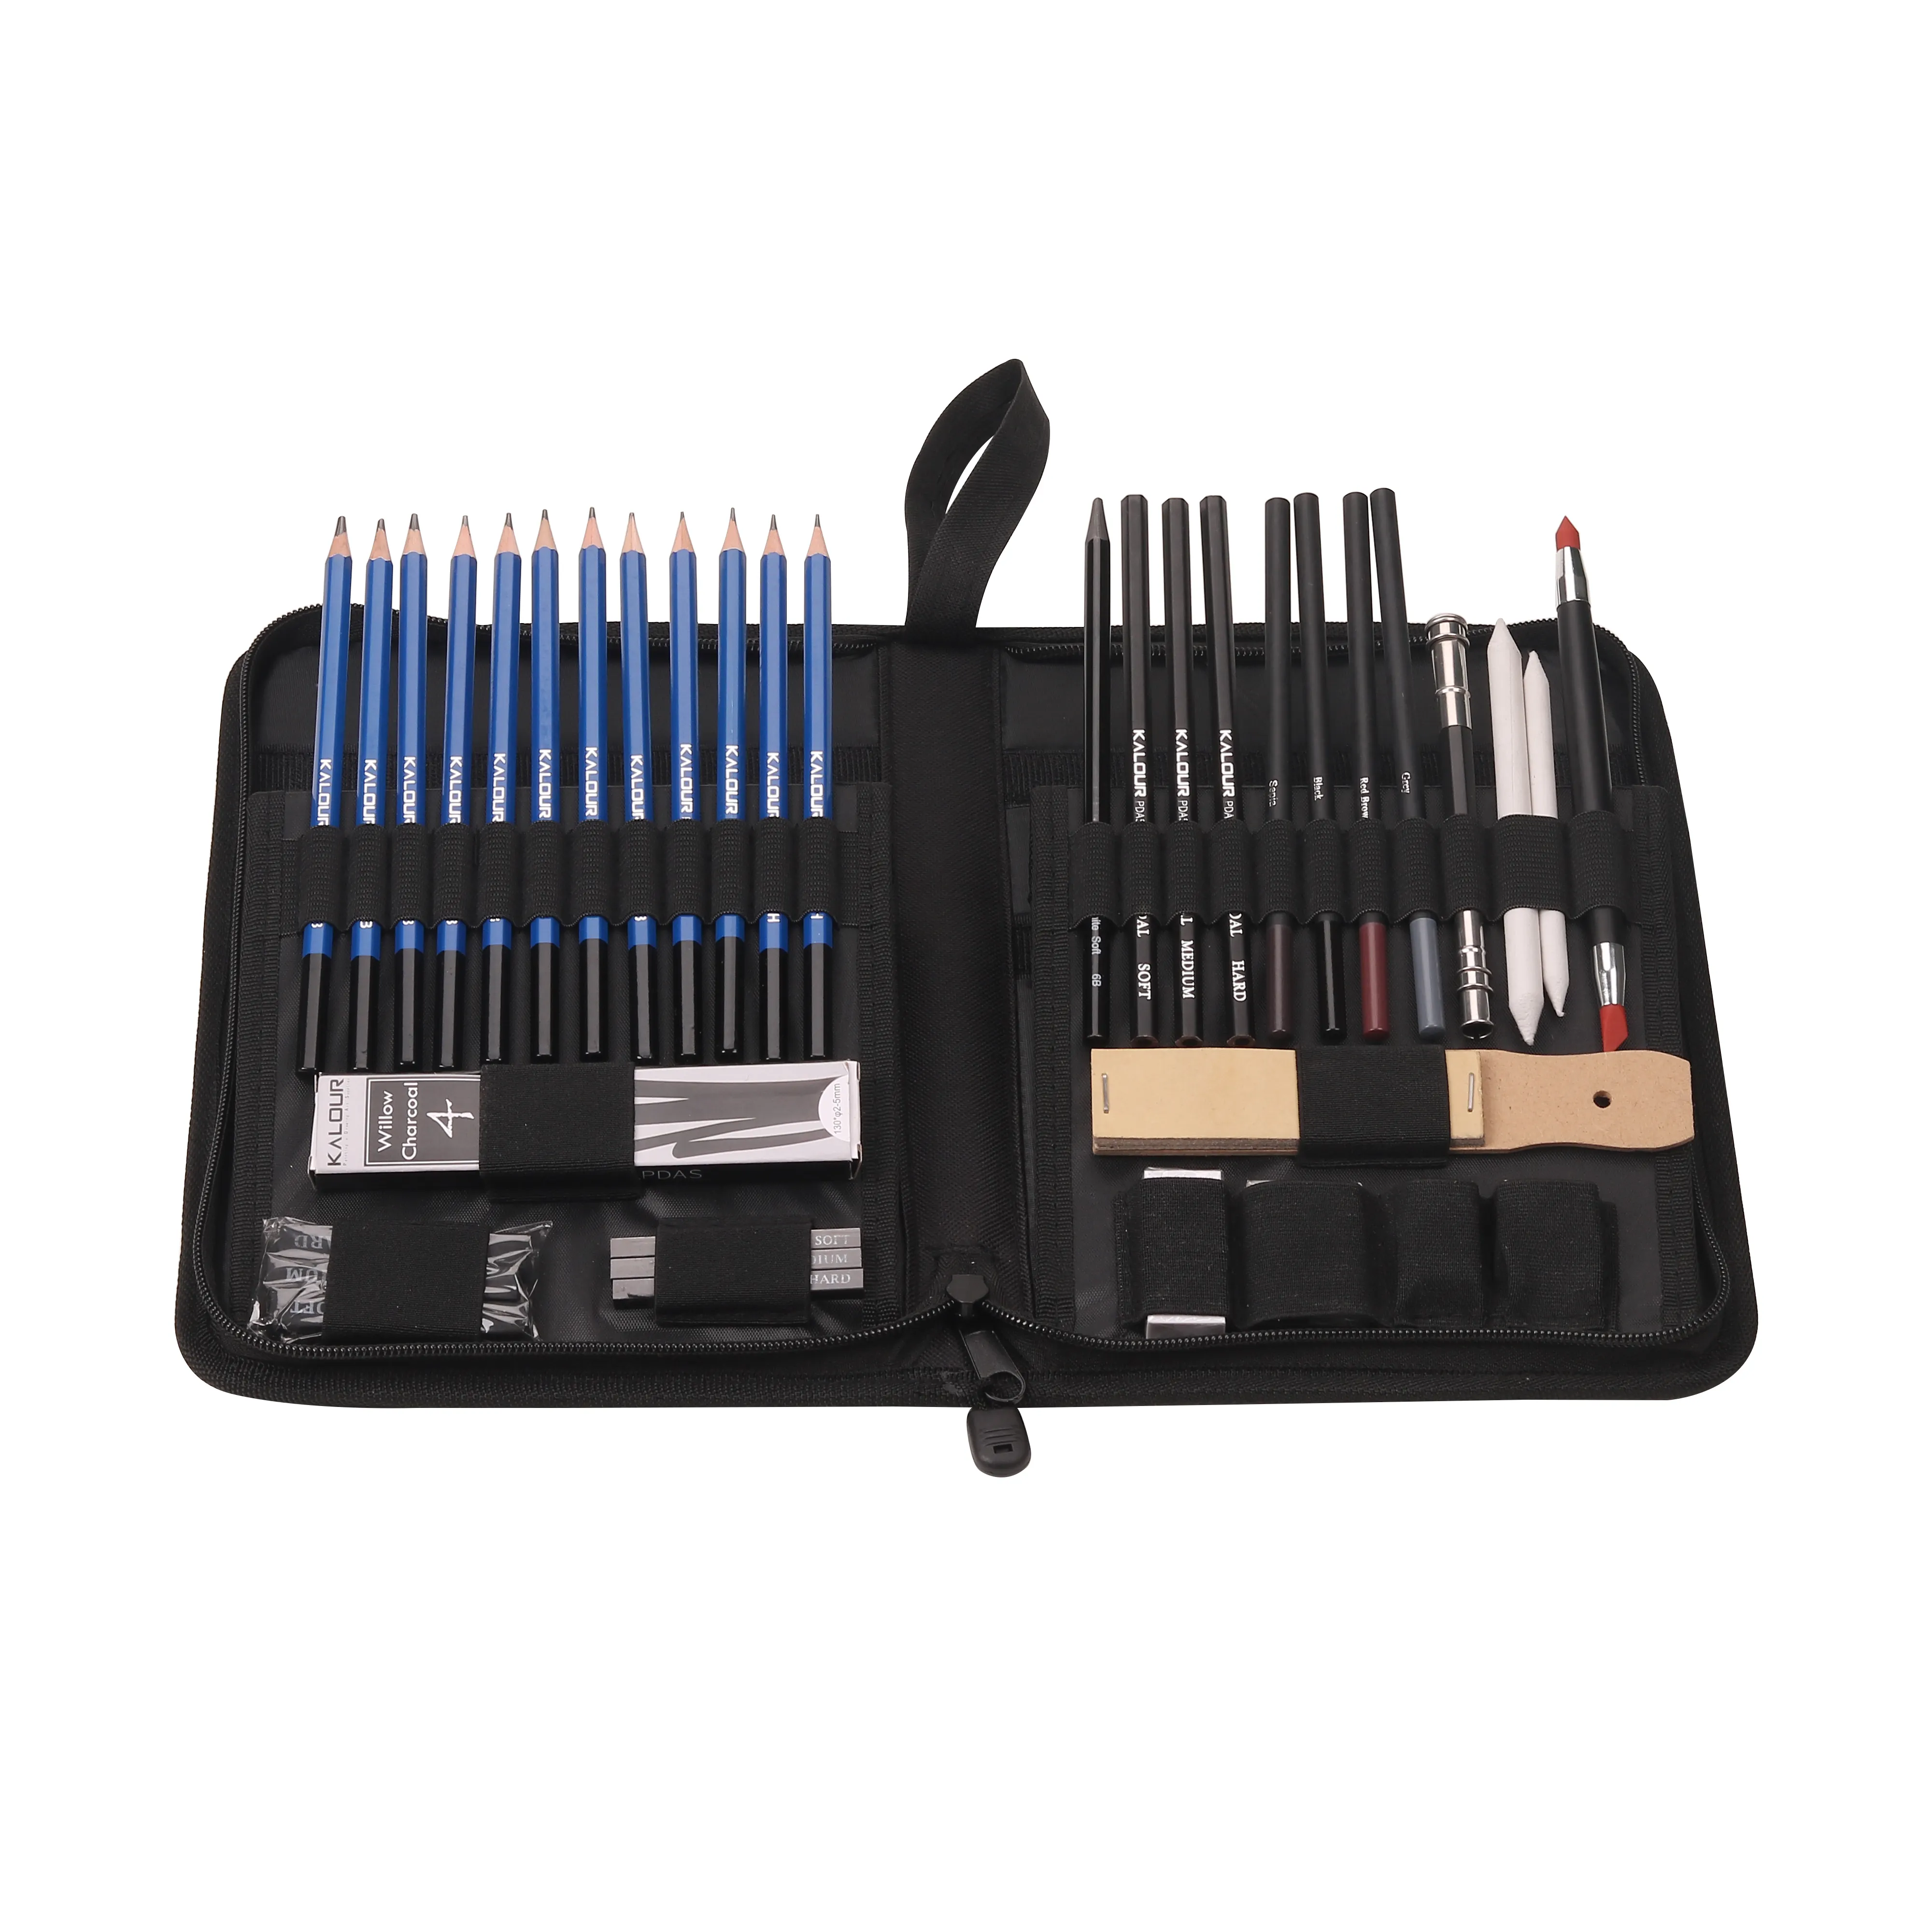 Professional 40 Pcs Sketch and Draw Set for Sketching and Drawing and Customization can be Available